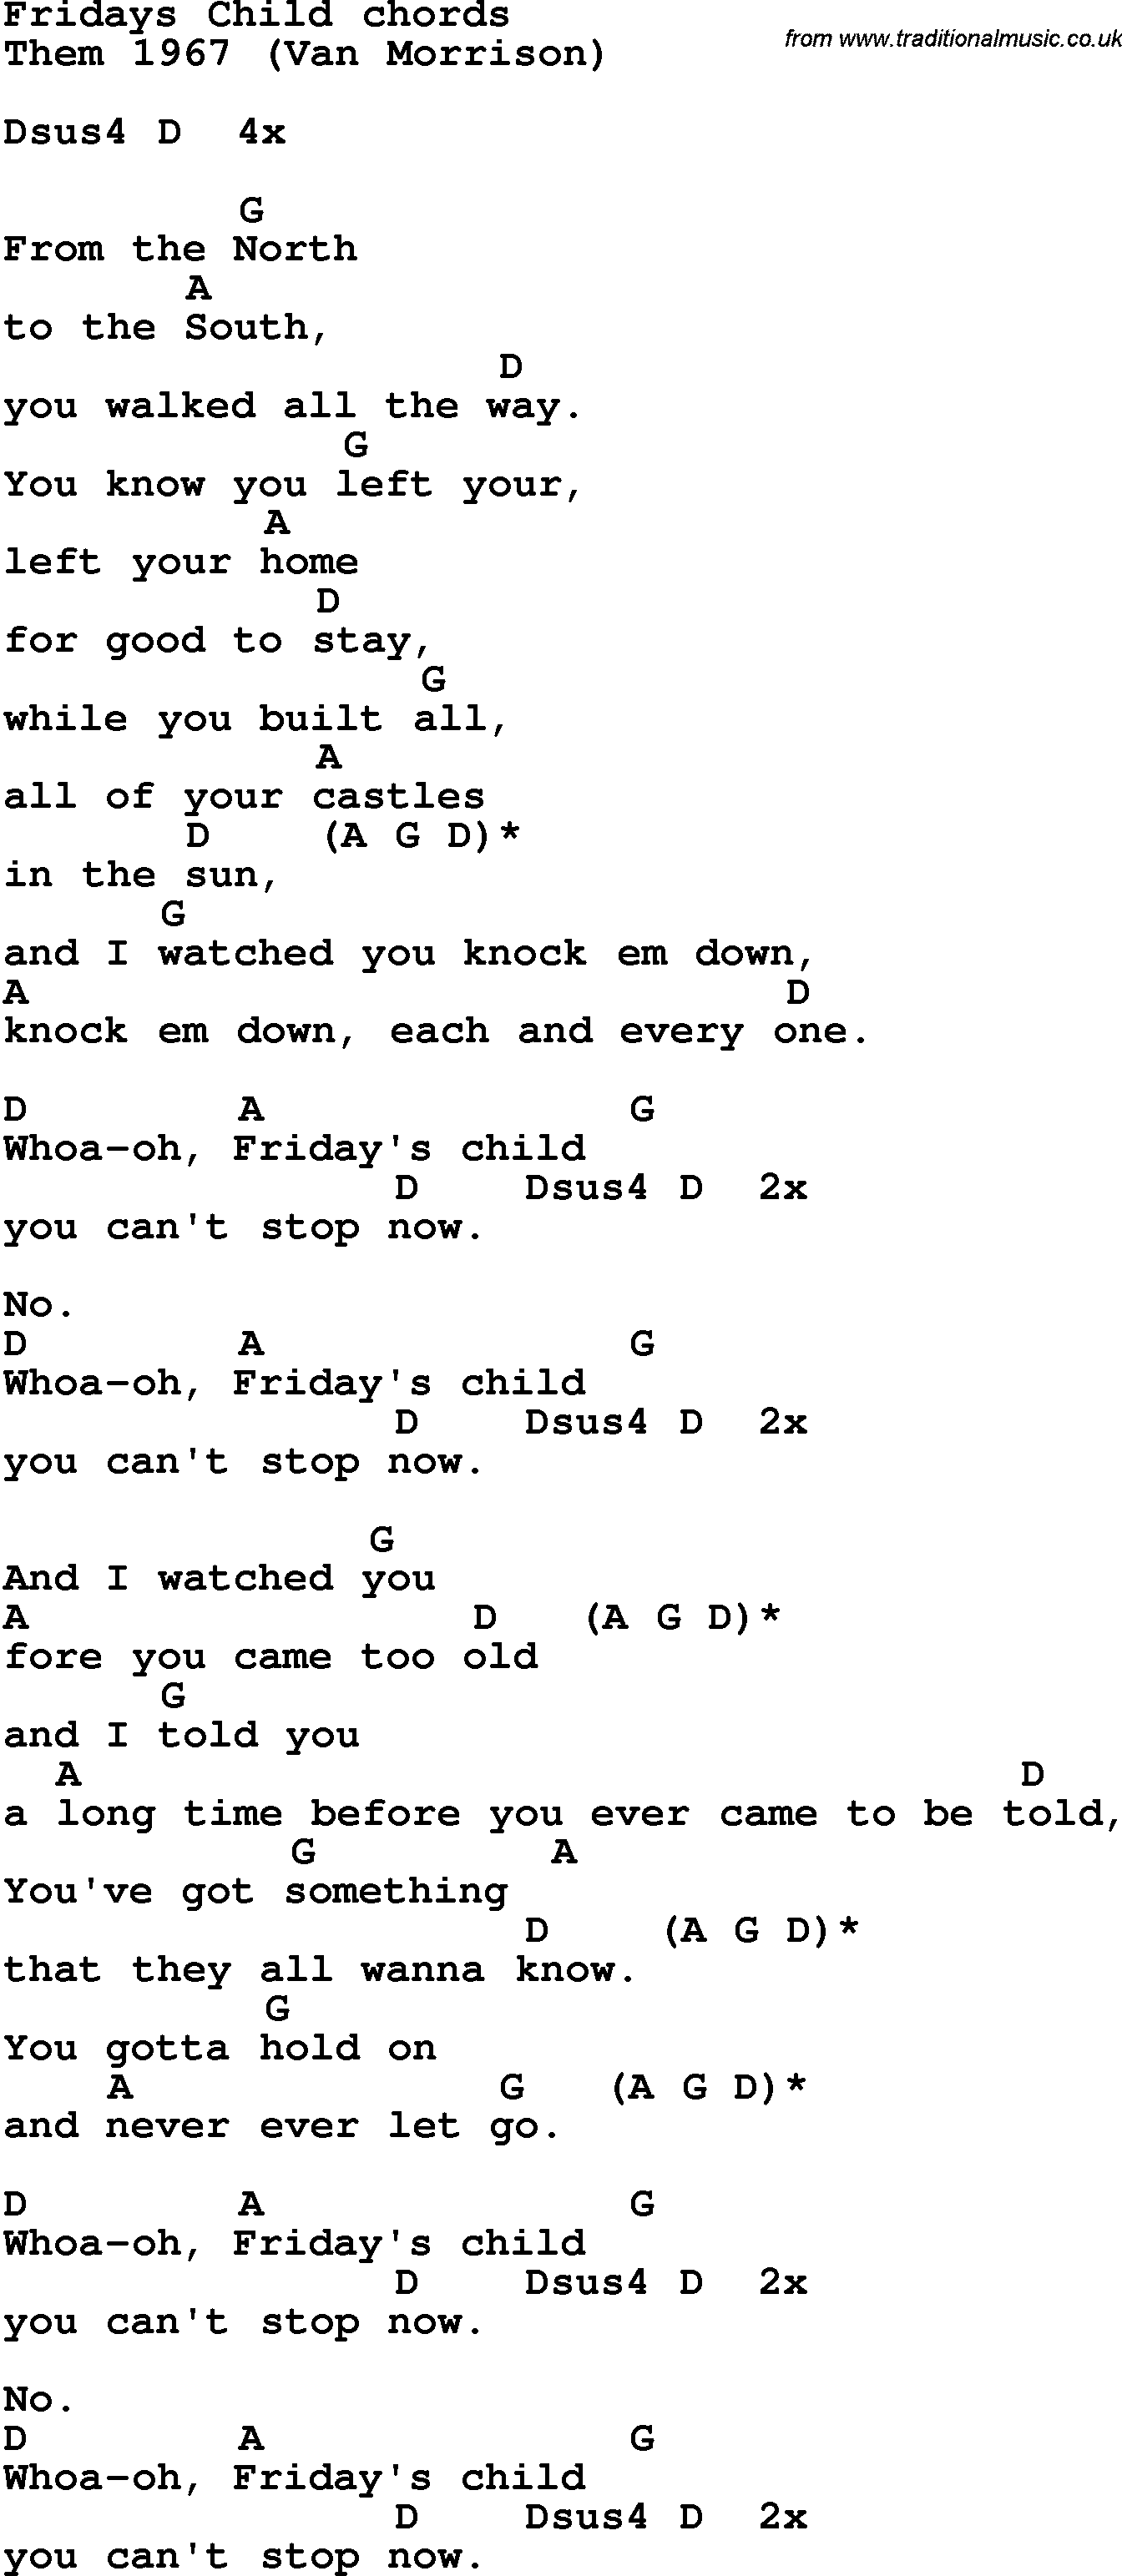 Song Lyrics with guitar chords for Fridays Child